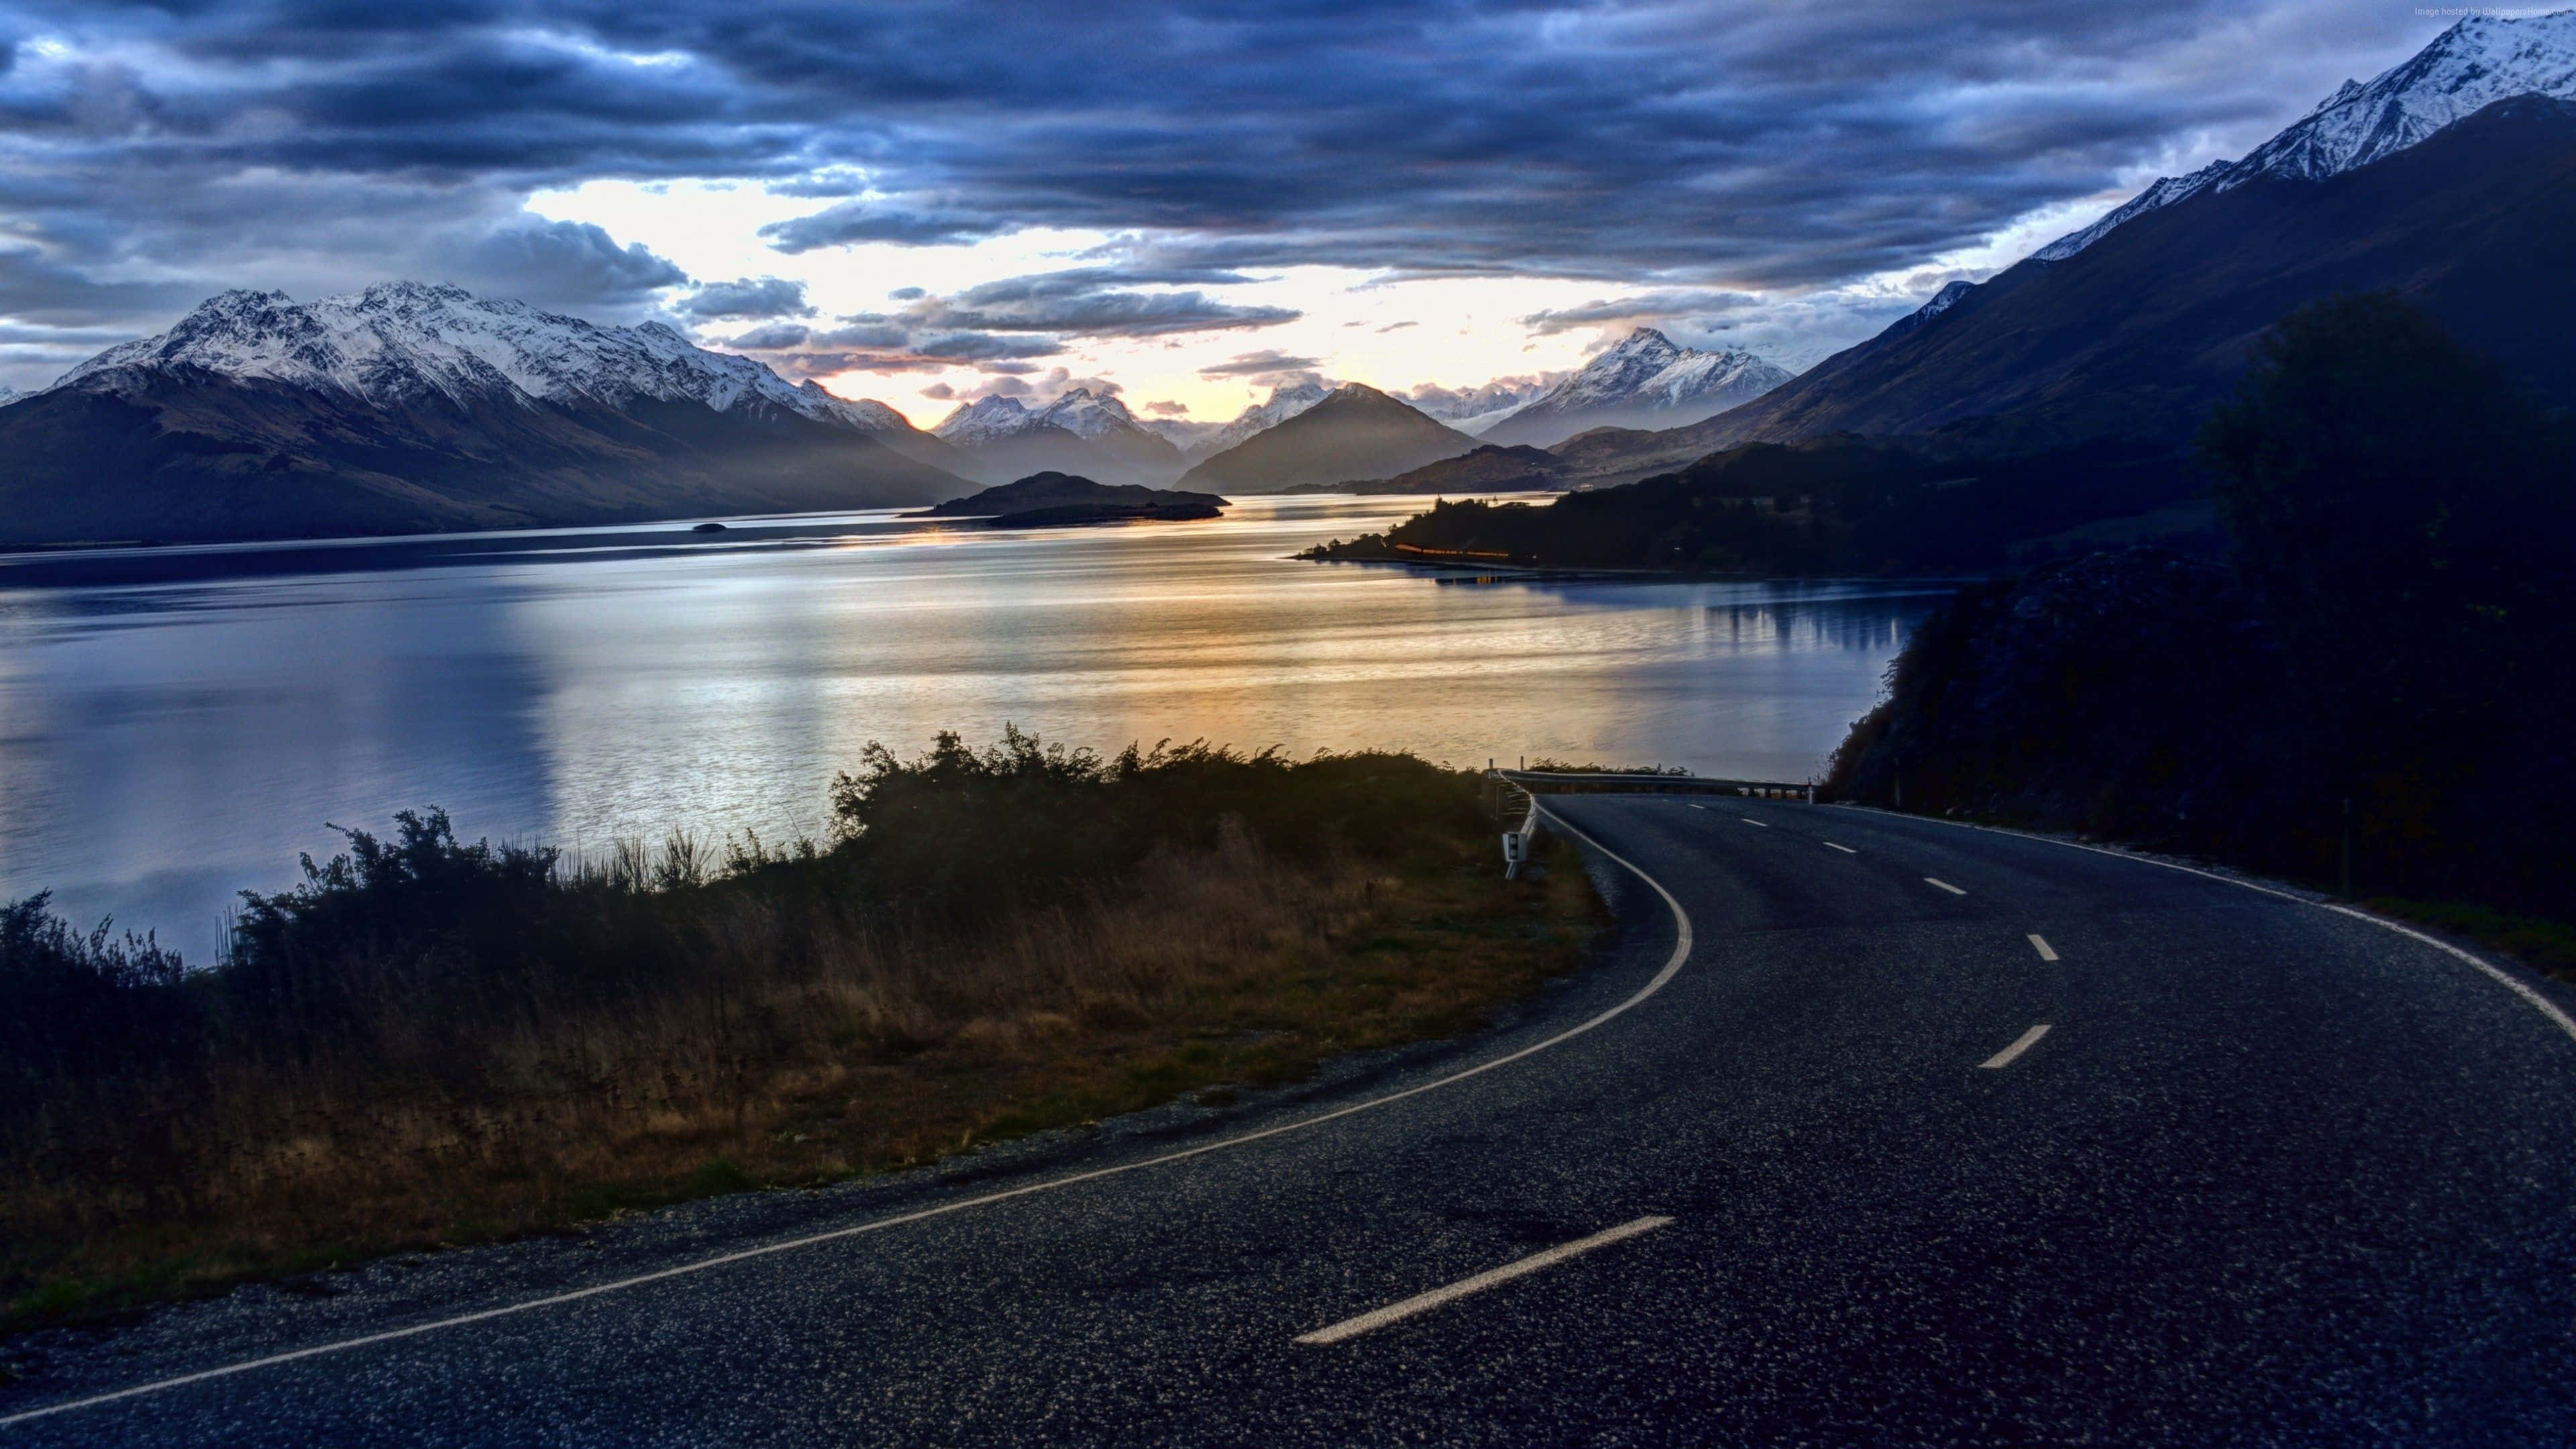 Enjoy the best of New Zealand's natural beauty.